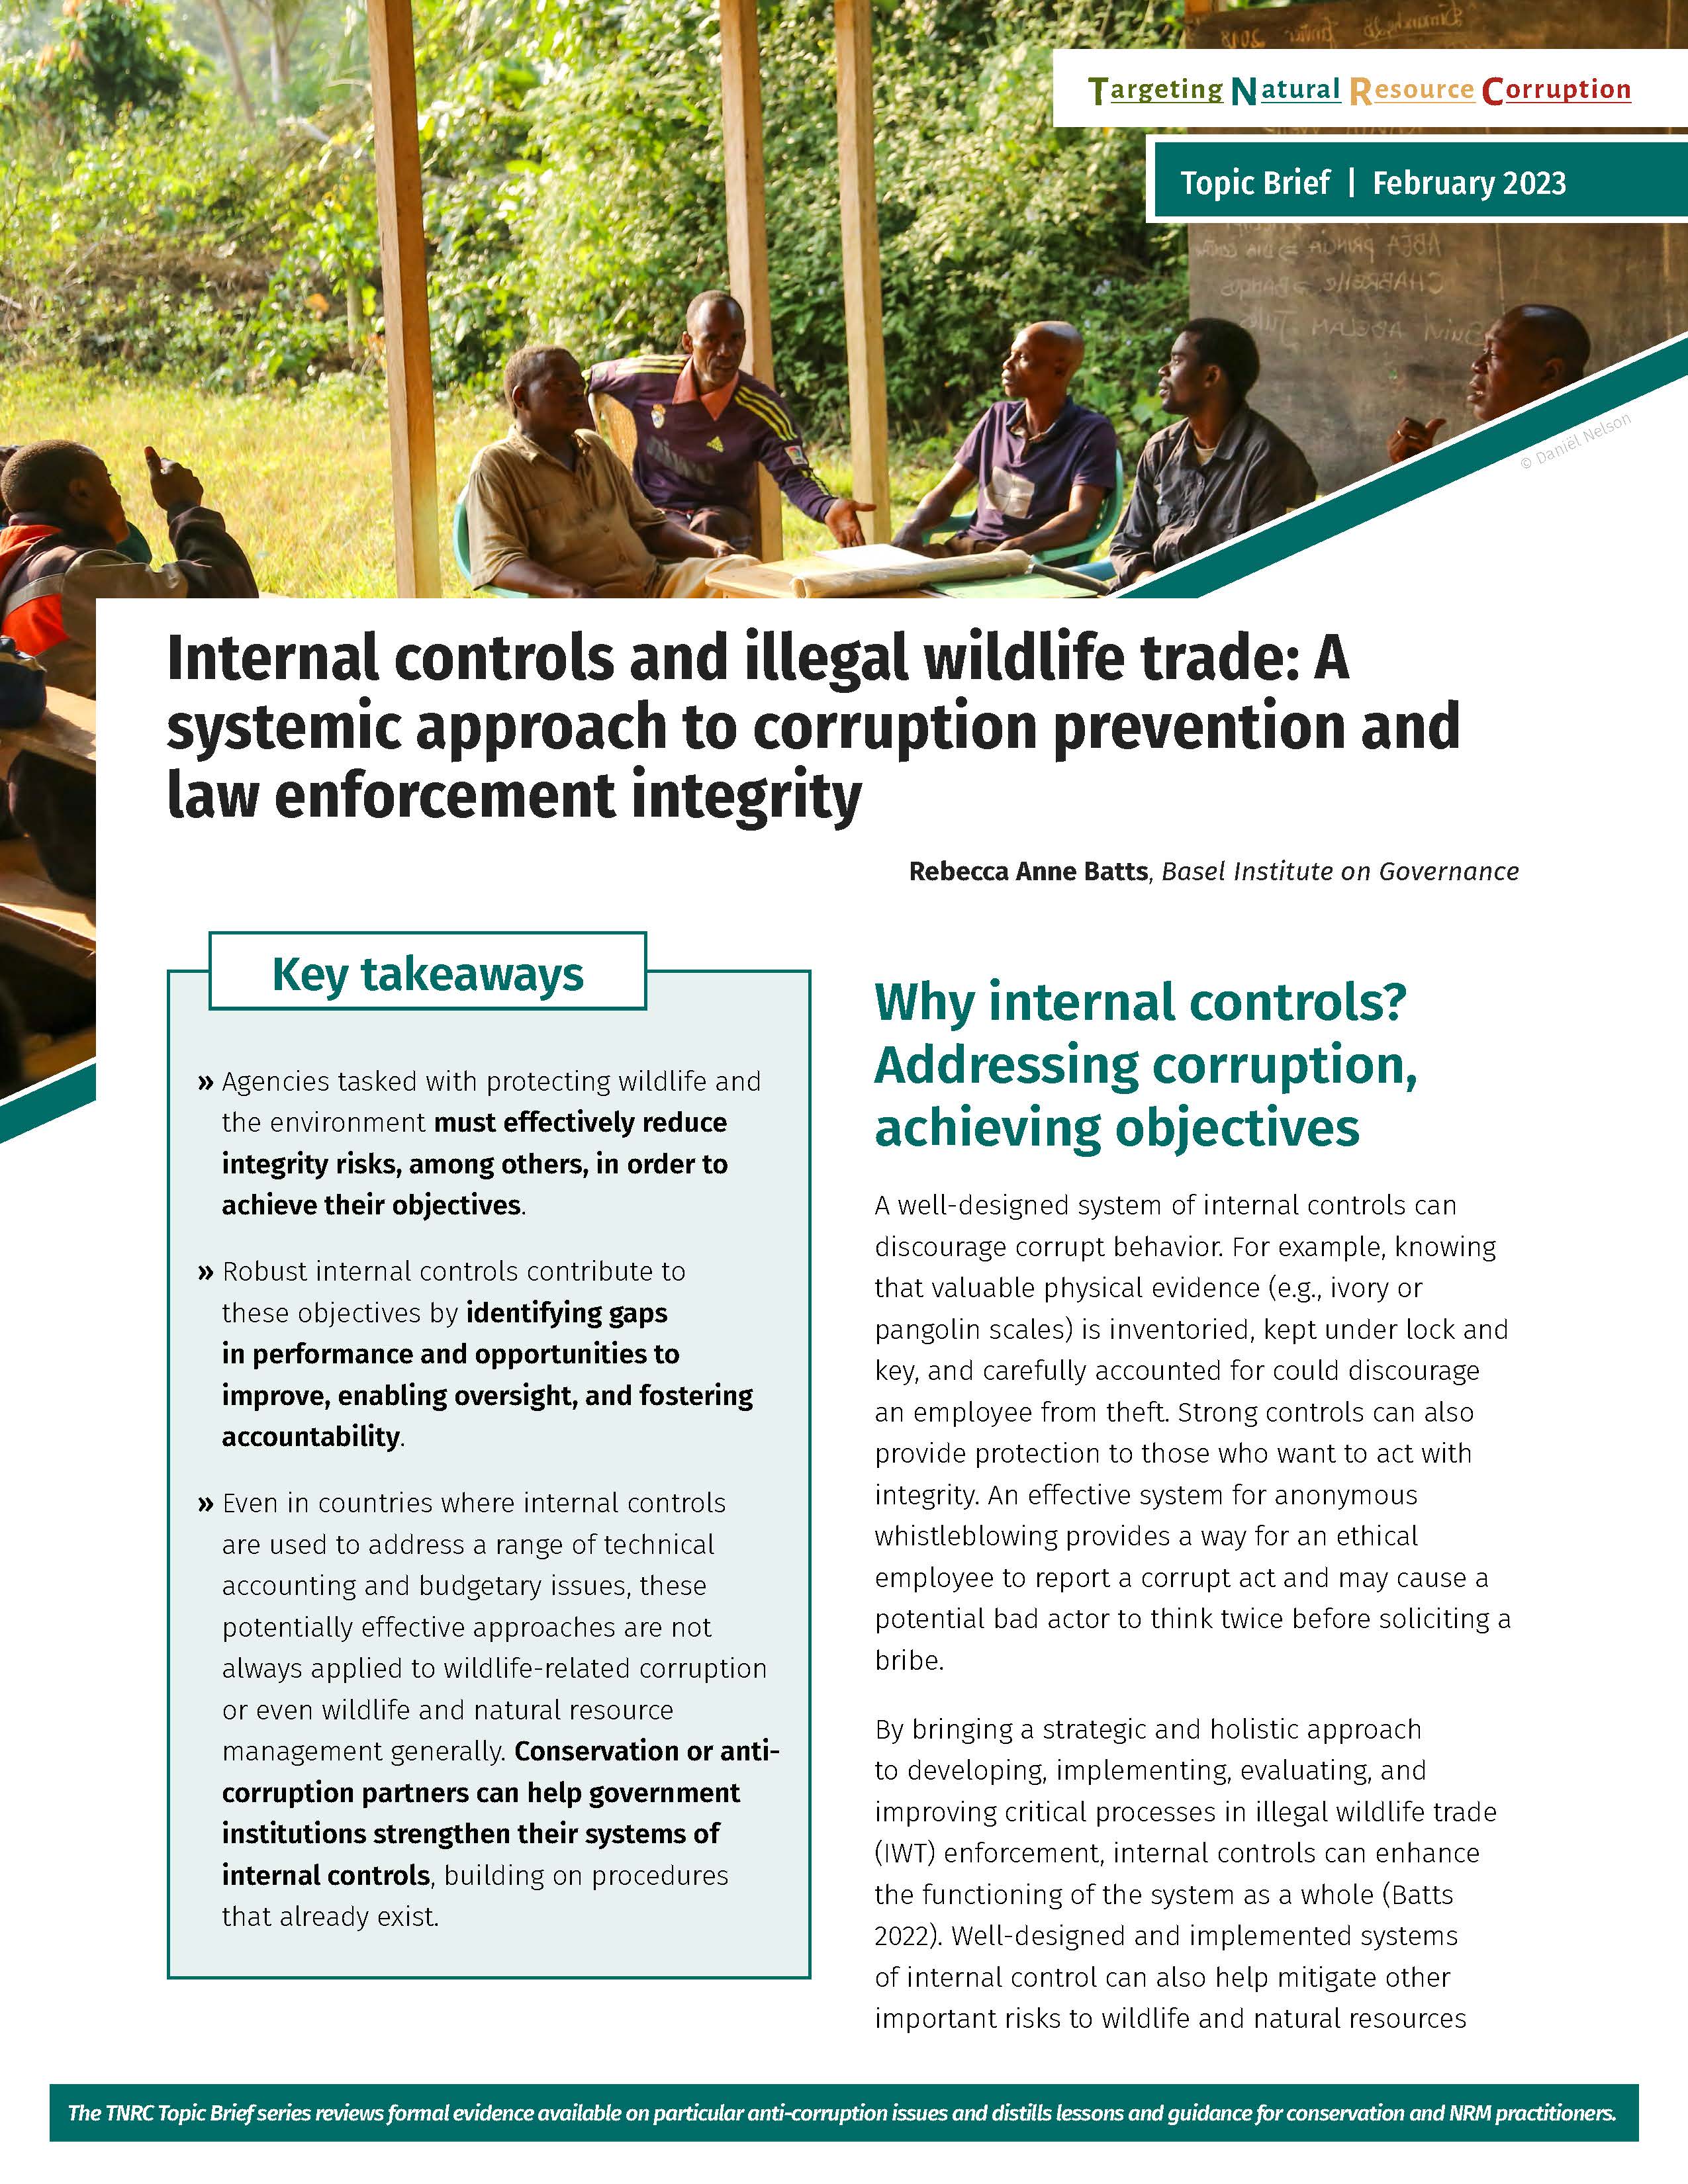 Cover page of publication - Internal controls and illegal wildlife trade: A systemic approach to corruption prevention and law enforcement integrity